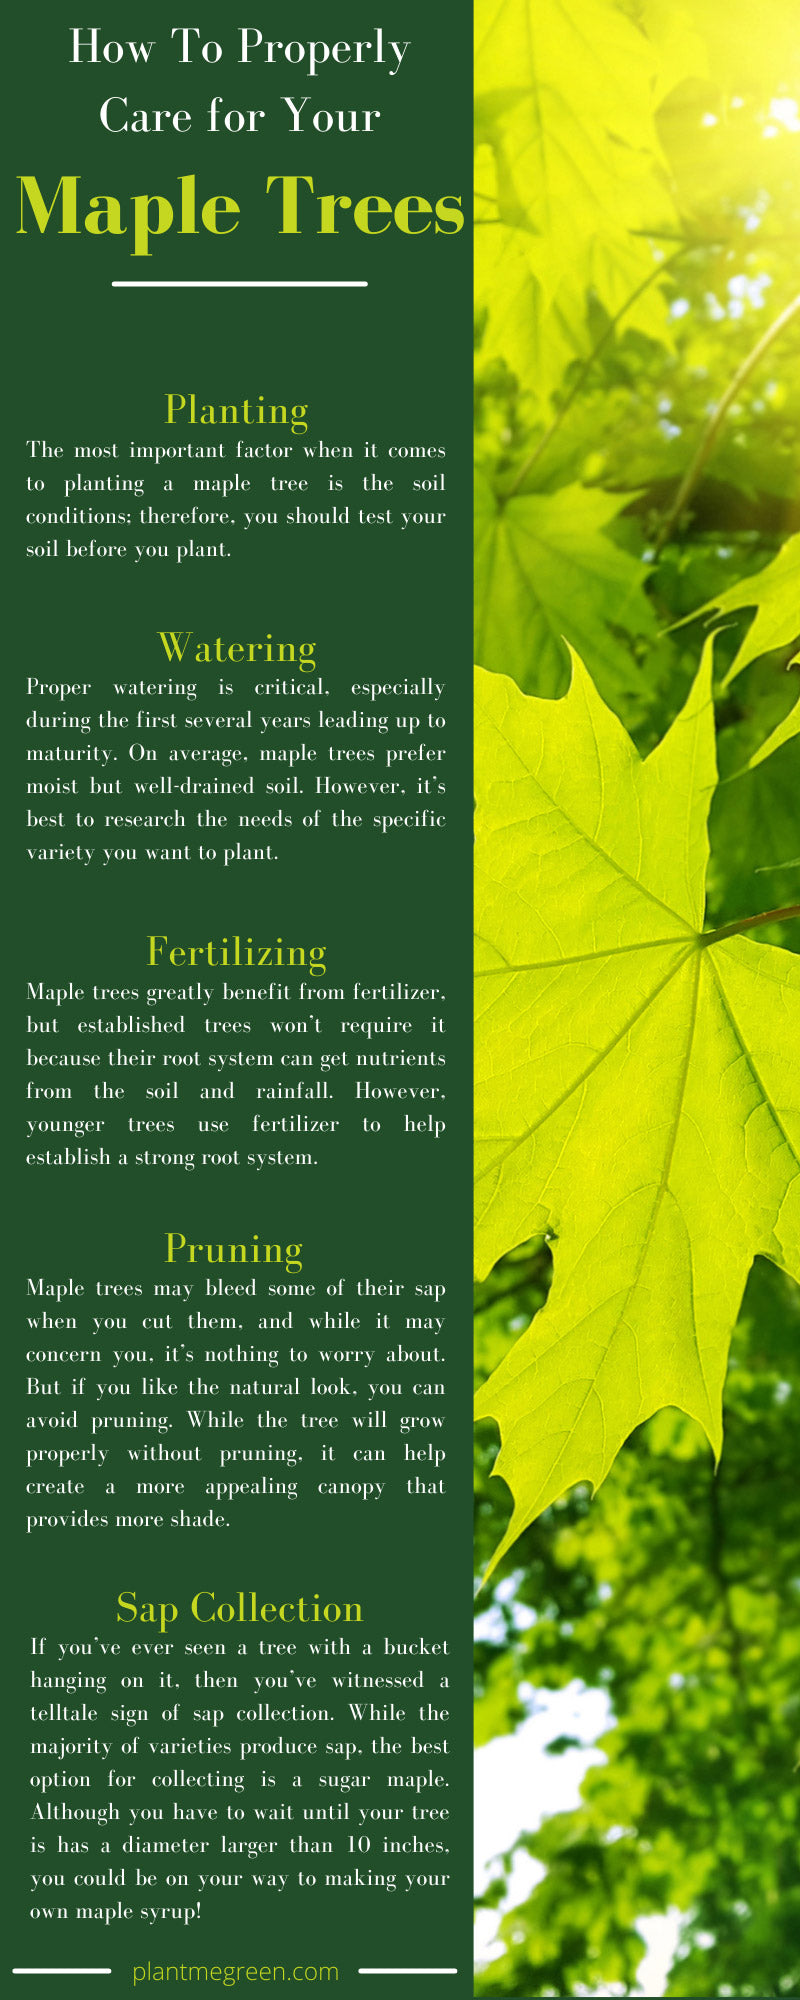 How To Properly Care for Your Maple Trees